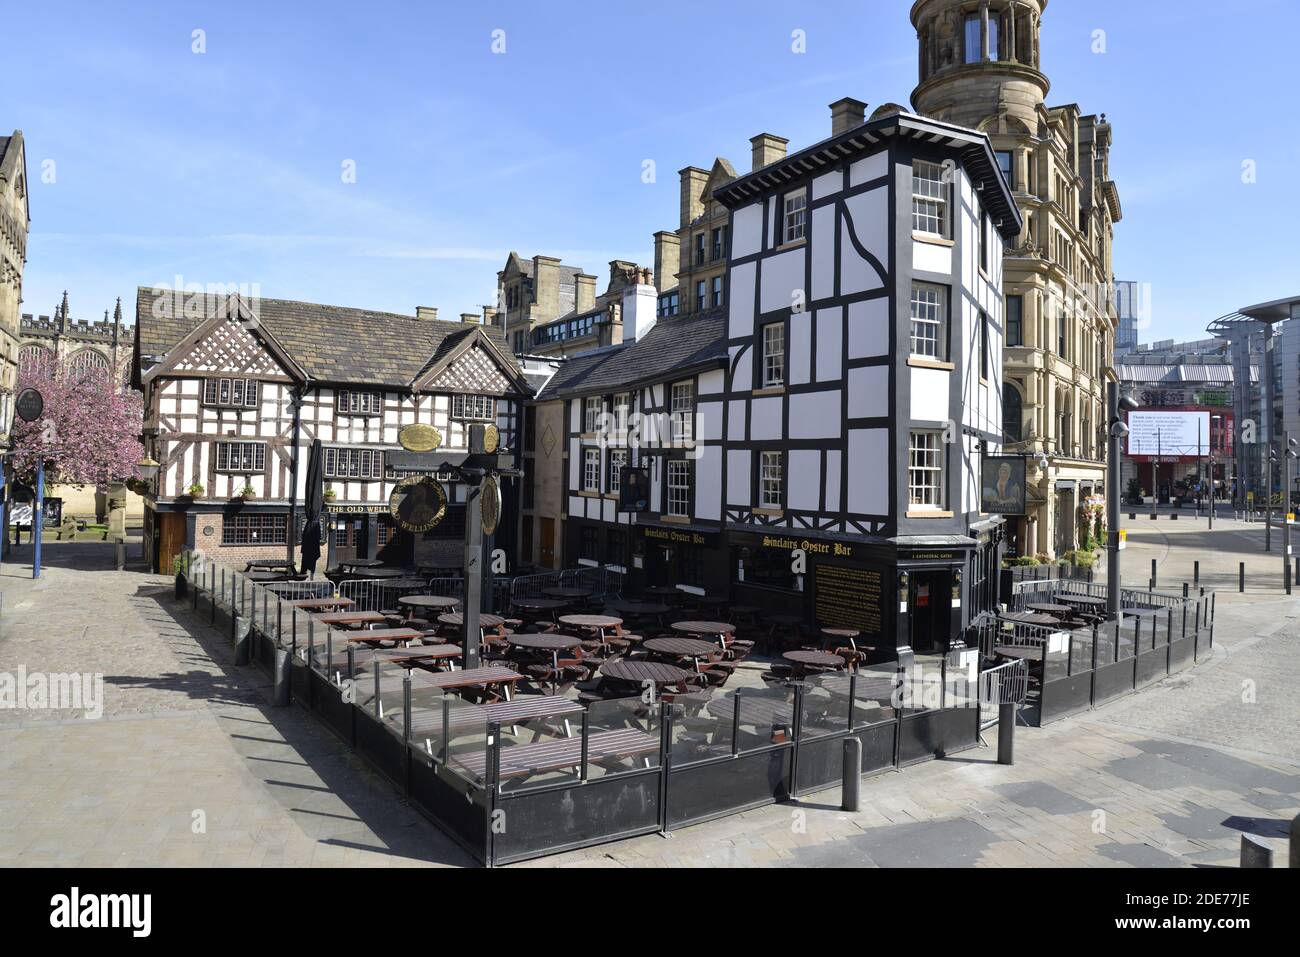 Sinclair's Oyster Bar, Shambles Square, Manchester Stockfoto